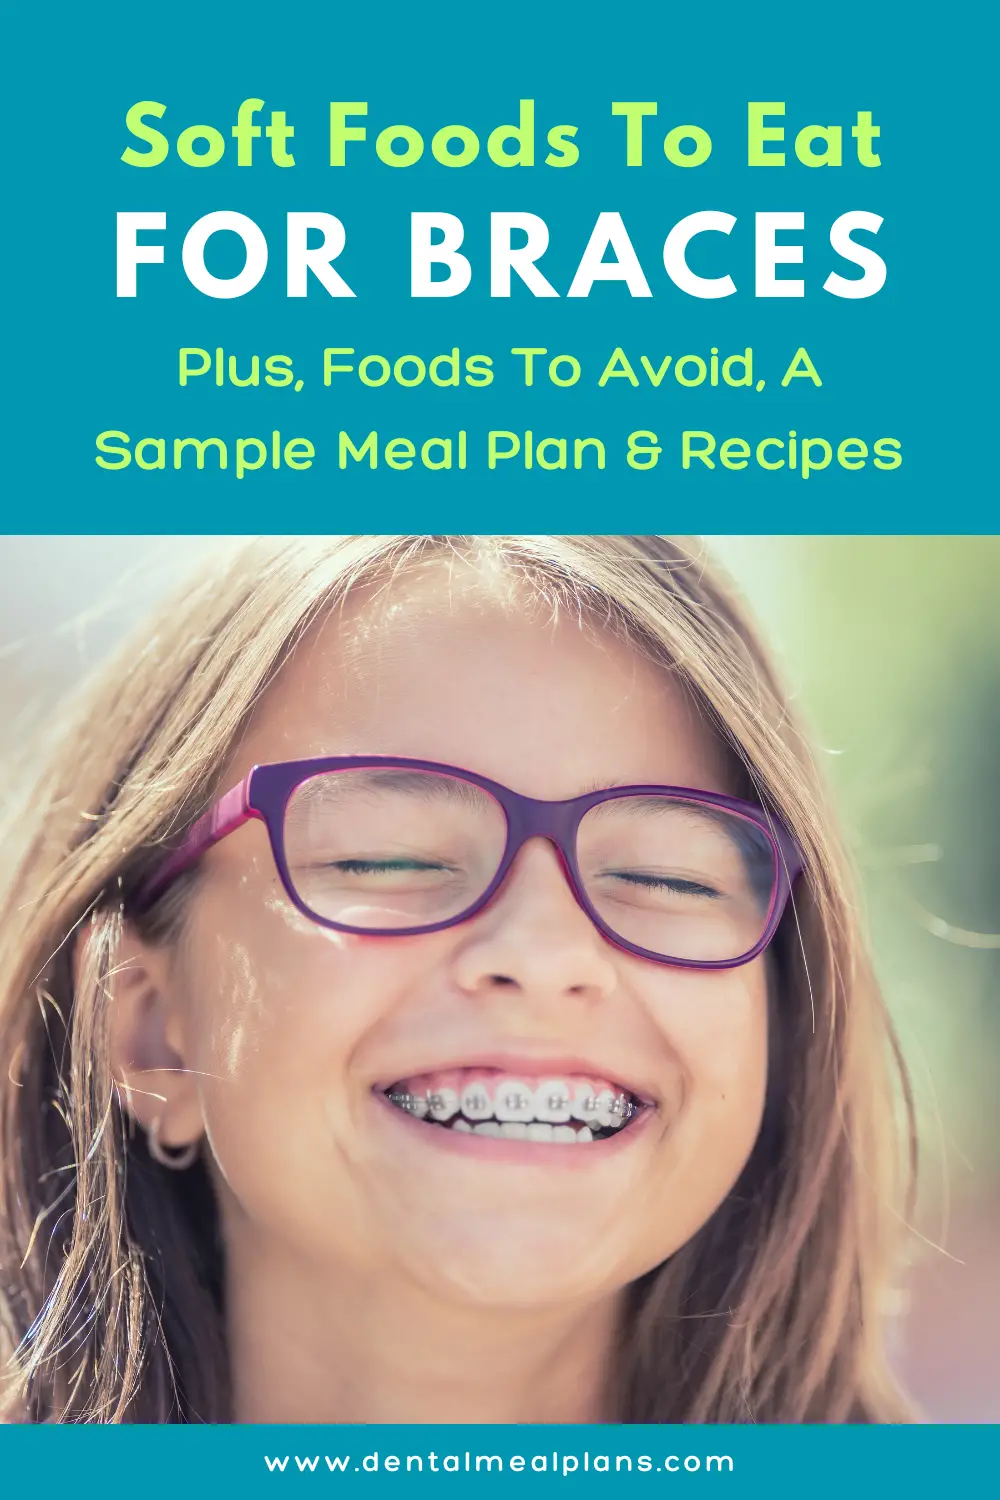 soft foods to eat for braces plus foods to avoid, sample meal plan and recipes